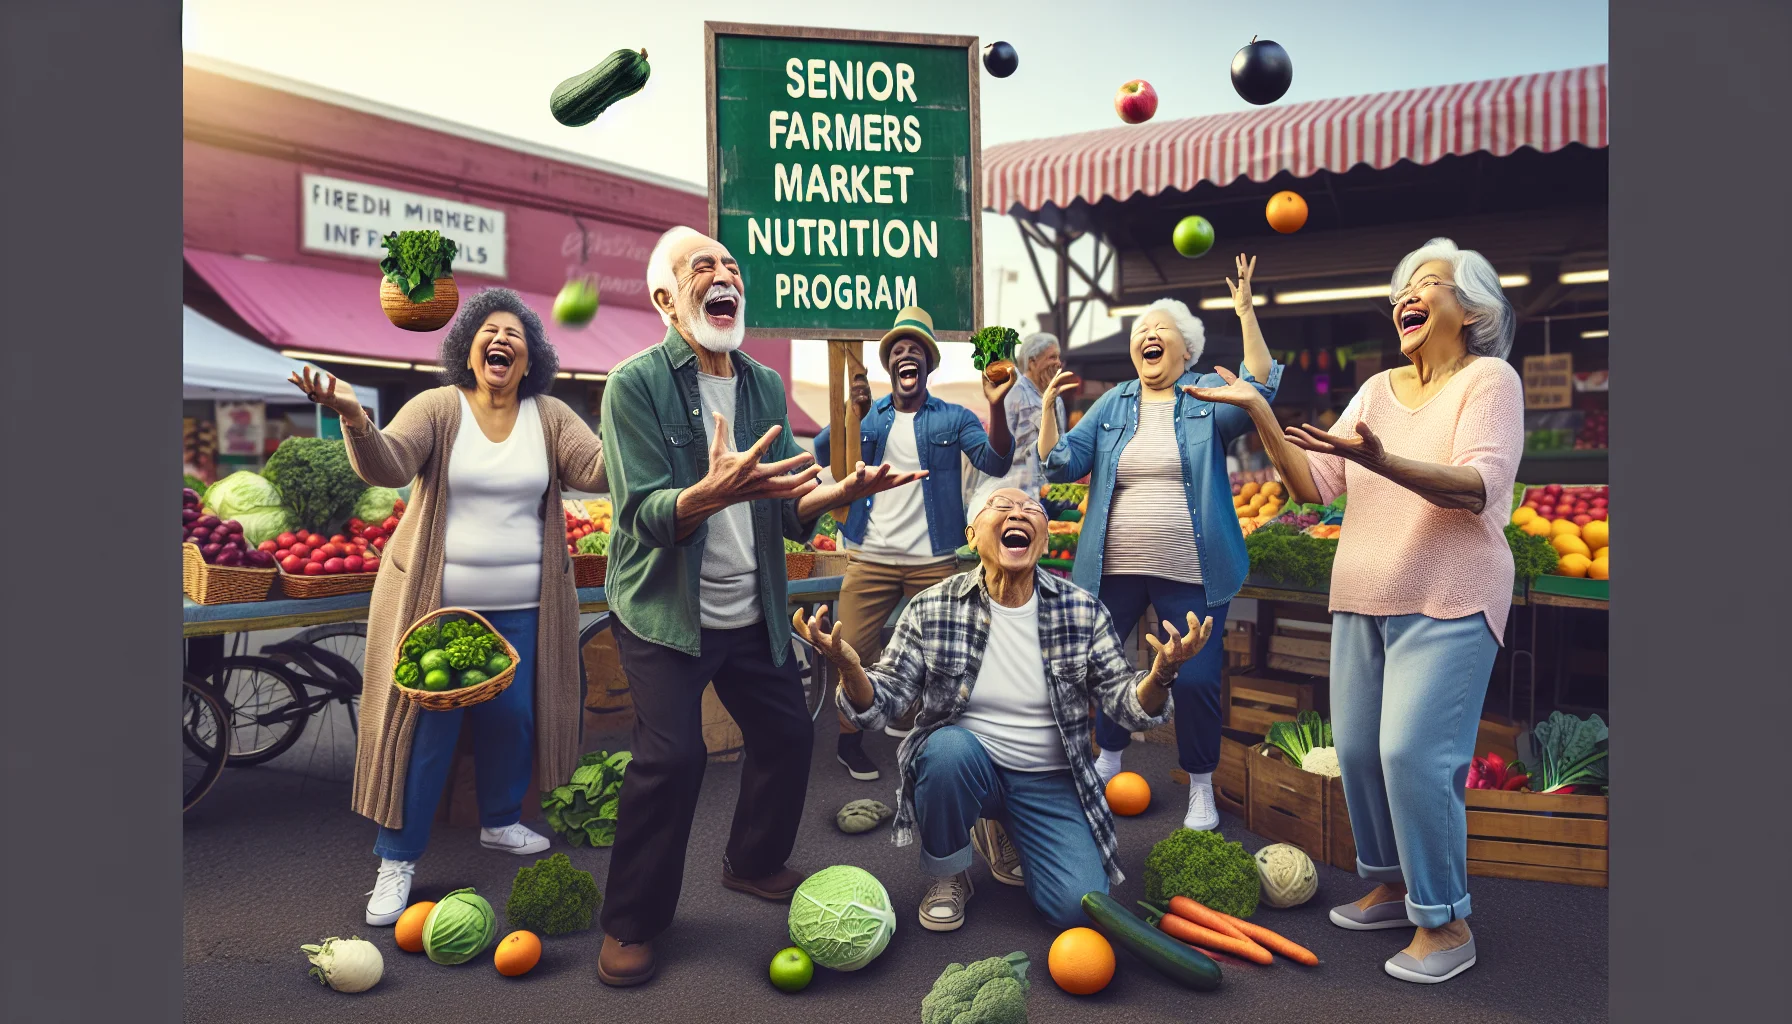 Create a humorously realistic image representing a Senior Farmers Market Nutrition Program scene from 2018. Picture this: A group of elderly people, of varying ethnicities such as Hispanic, Black, and Middle-Eastern, are gathered in an open-air market. They're laughing heartily as one elderly Caucasian man enthusiastically juggles colorful fruits and vegetables. Another elderly South Asian woman is chuckling while attempting to balance a large, leafy green on her head. Everyone is wearing casual, comfortable clothing appropriate for seniors. Signboards advertising an array of fresh, healthy produce dot the background, spreading the message of maintaining a nutritious diet in a fun, lighthearted way.